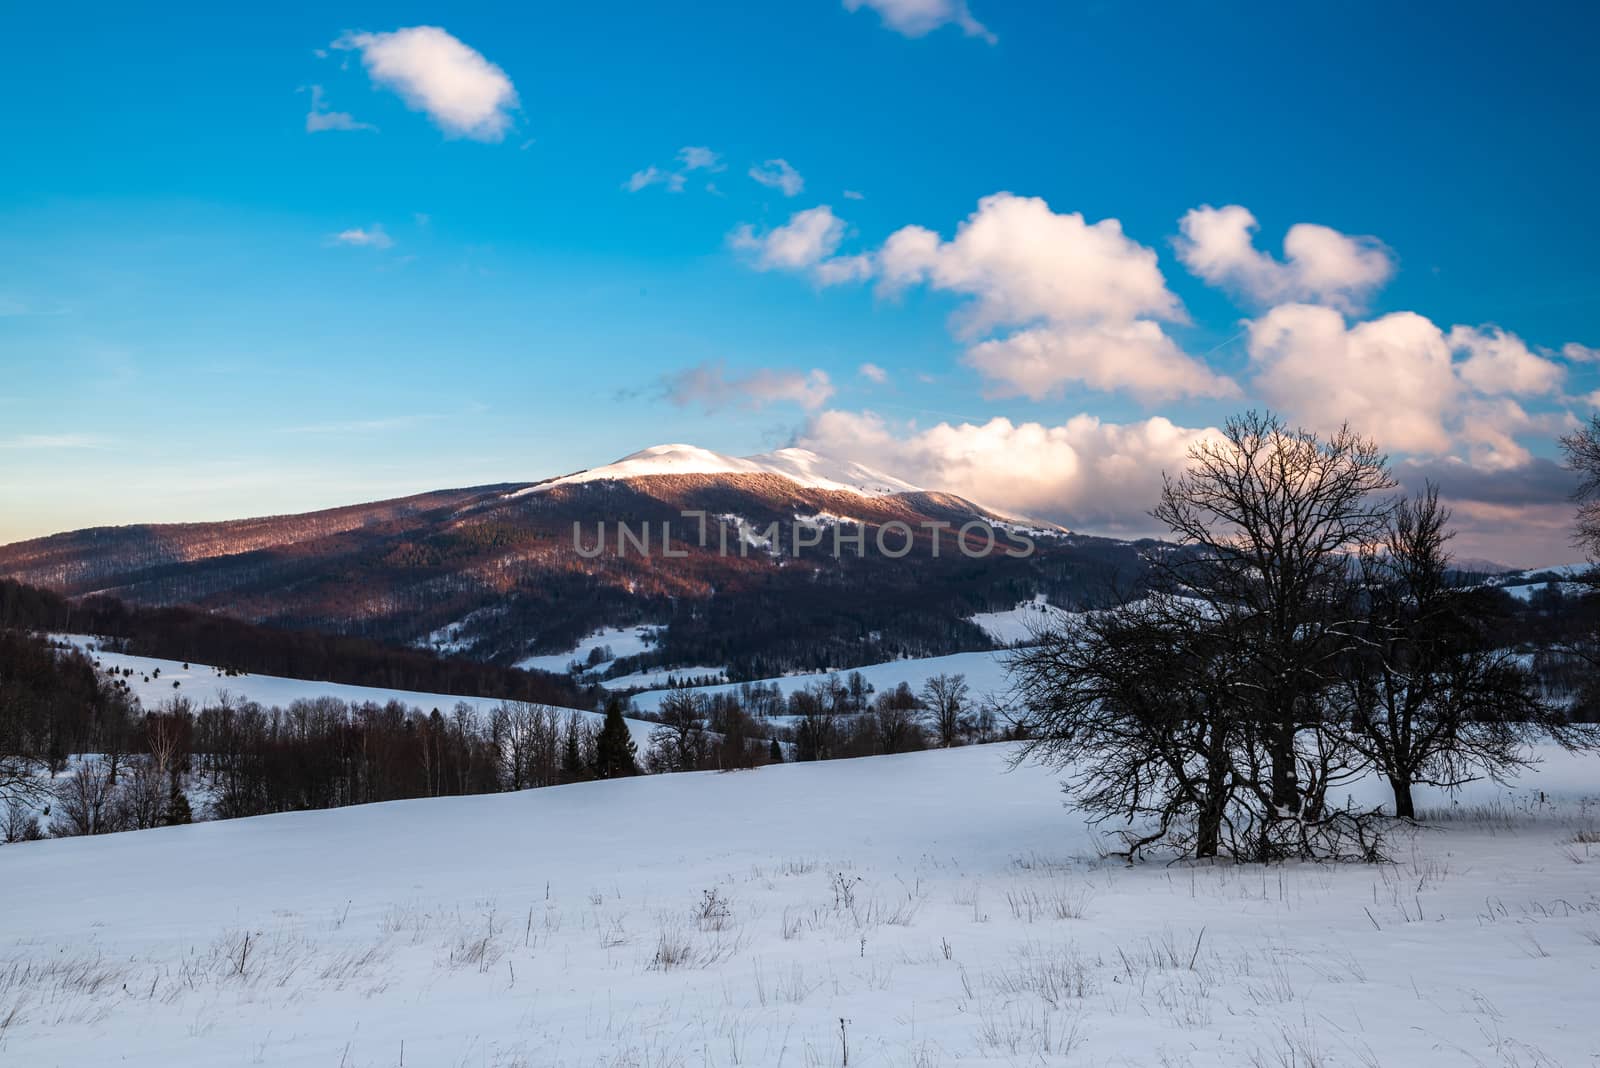 Cloudscape at Wetlina in Bieszczady Mountains, Poland at Winter  by merc67